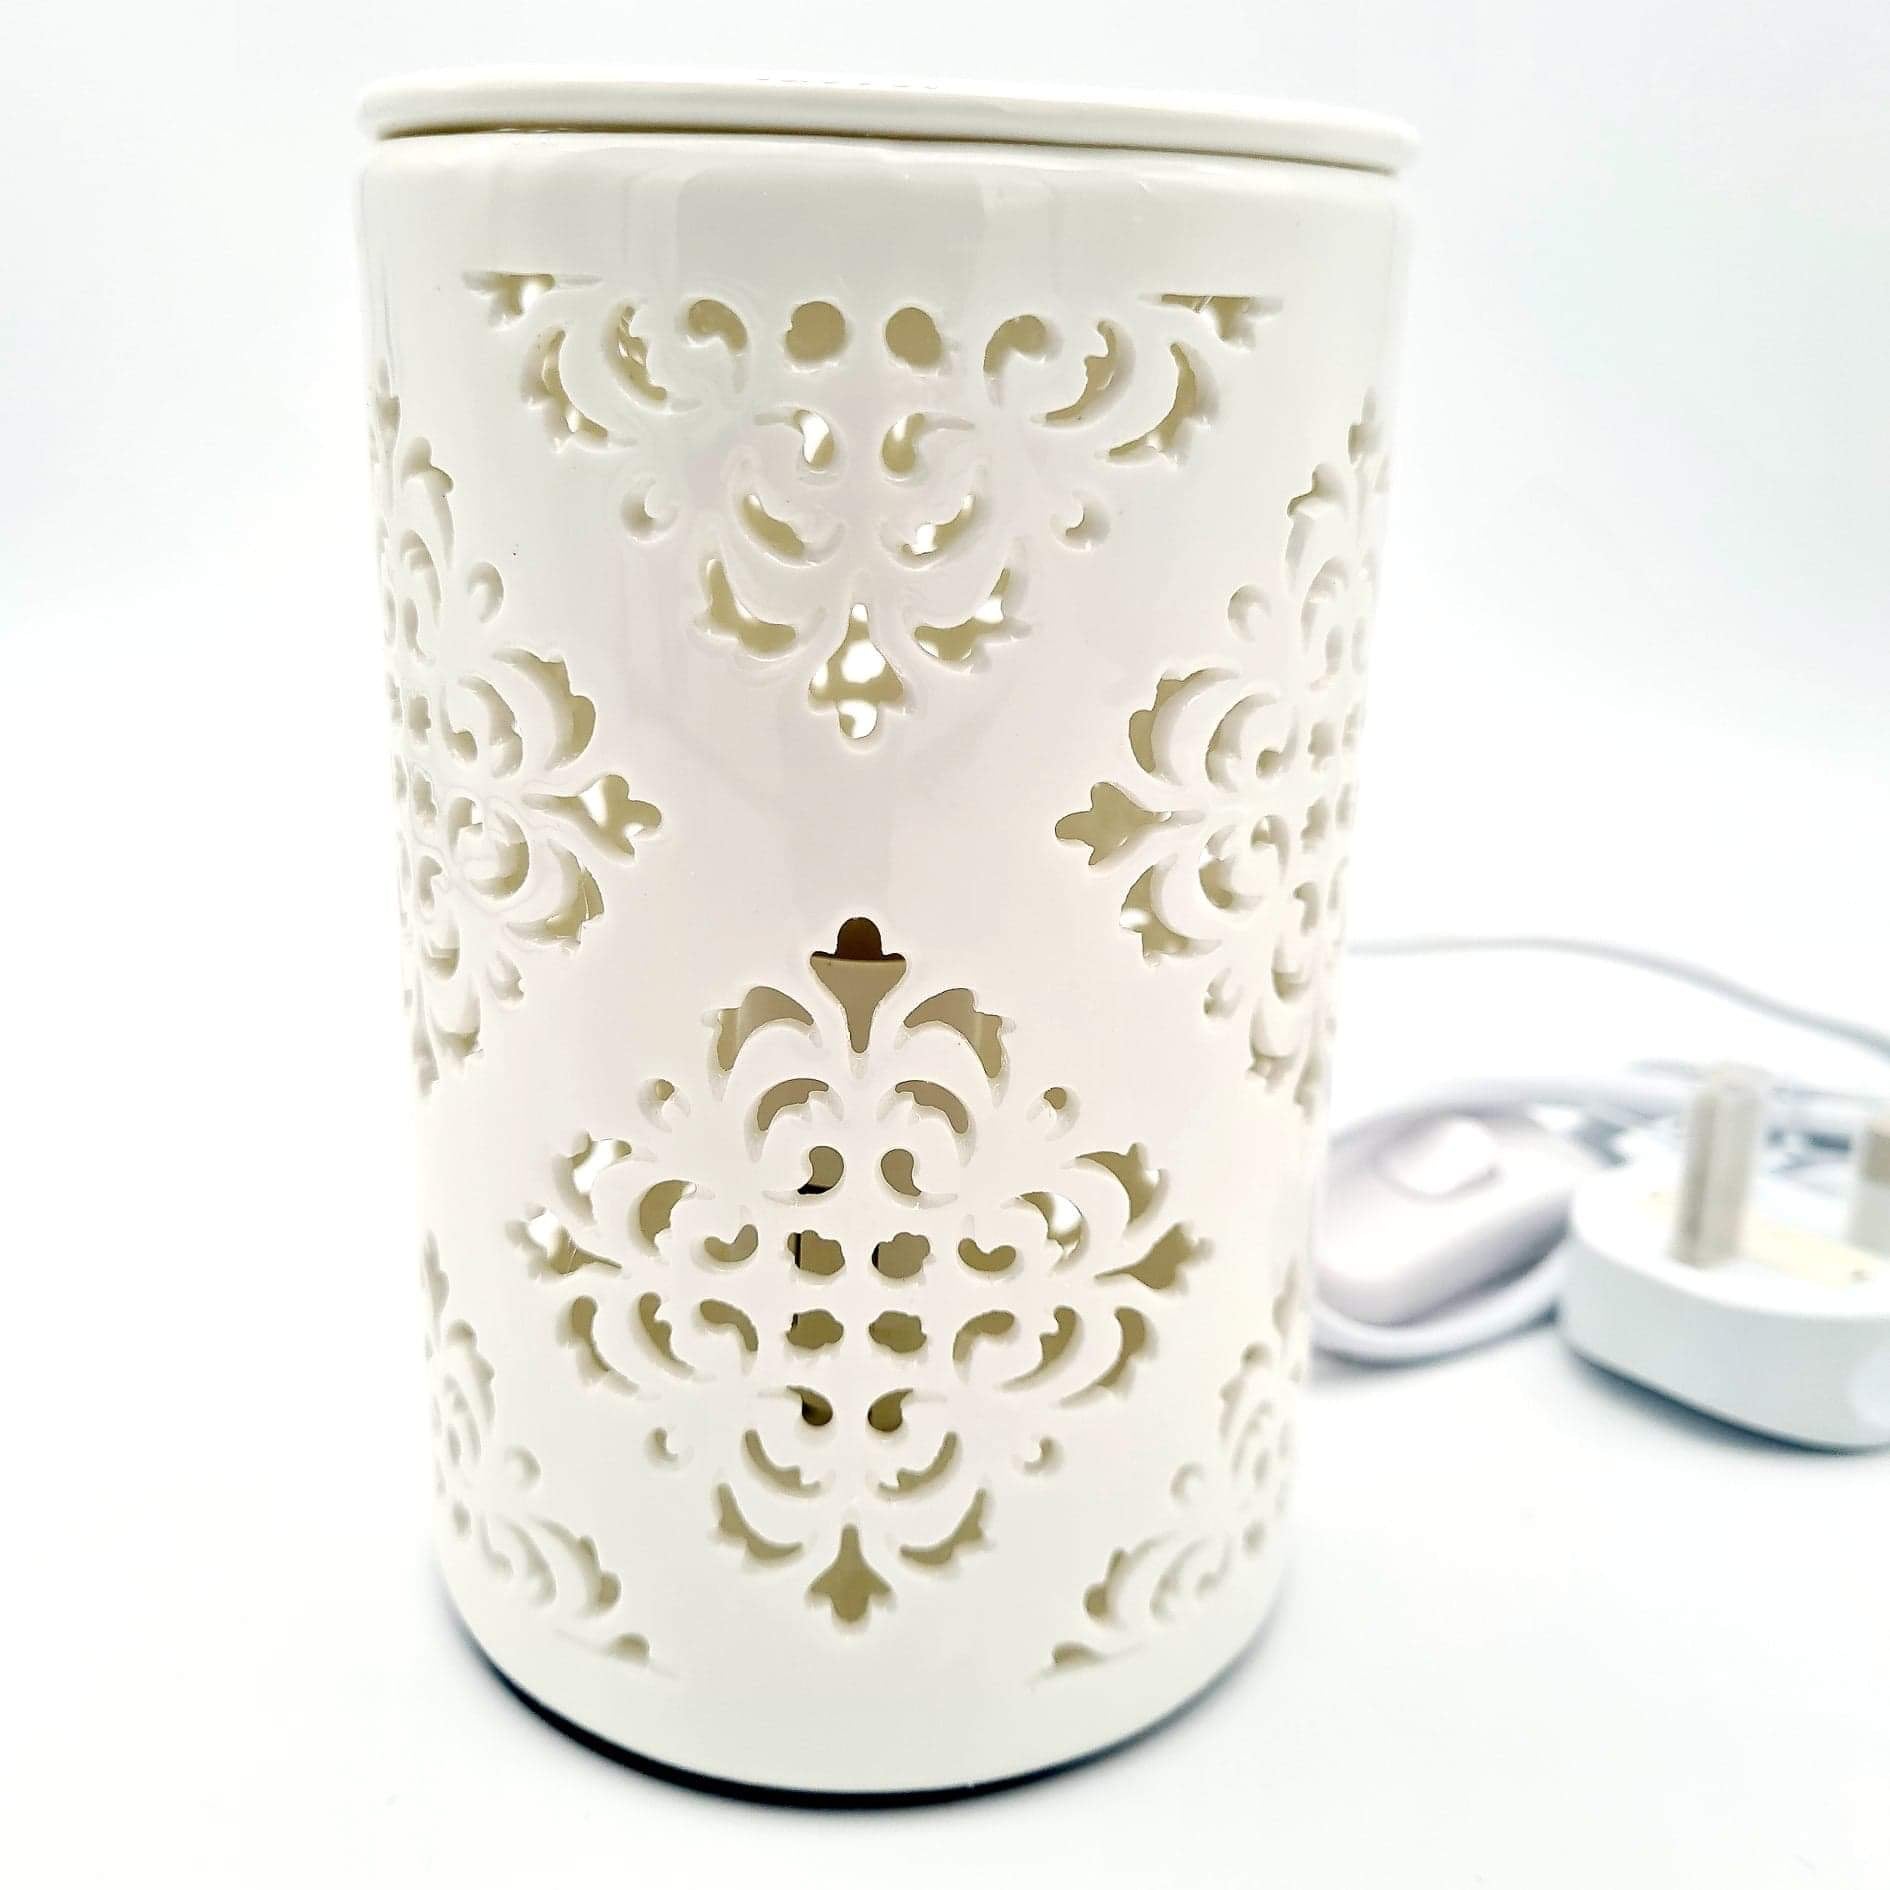 Damask Cut Out Electric Wax Burner / Melter